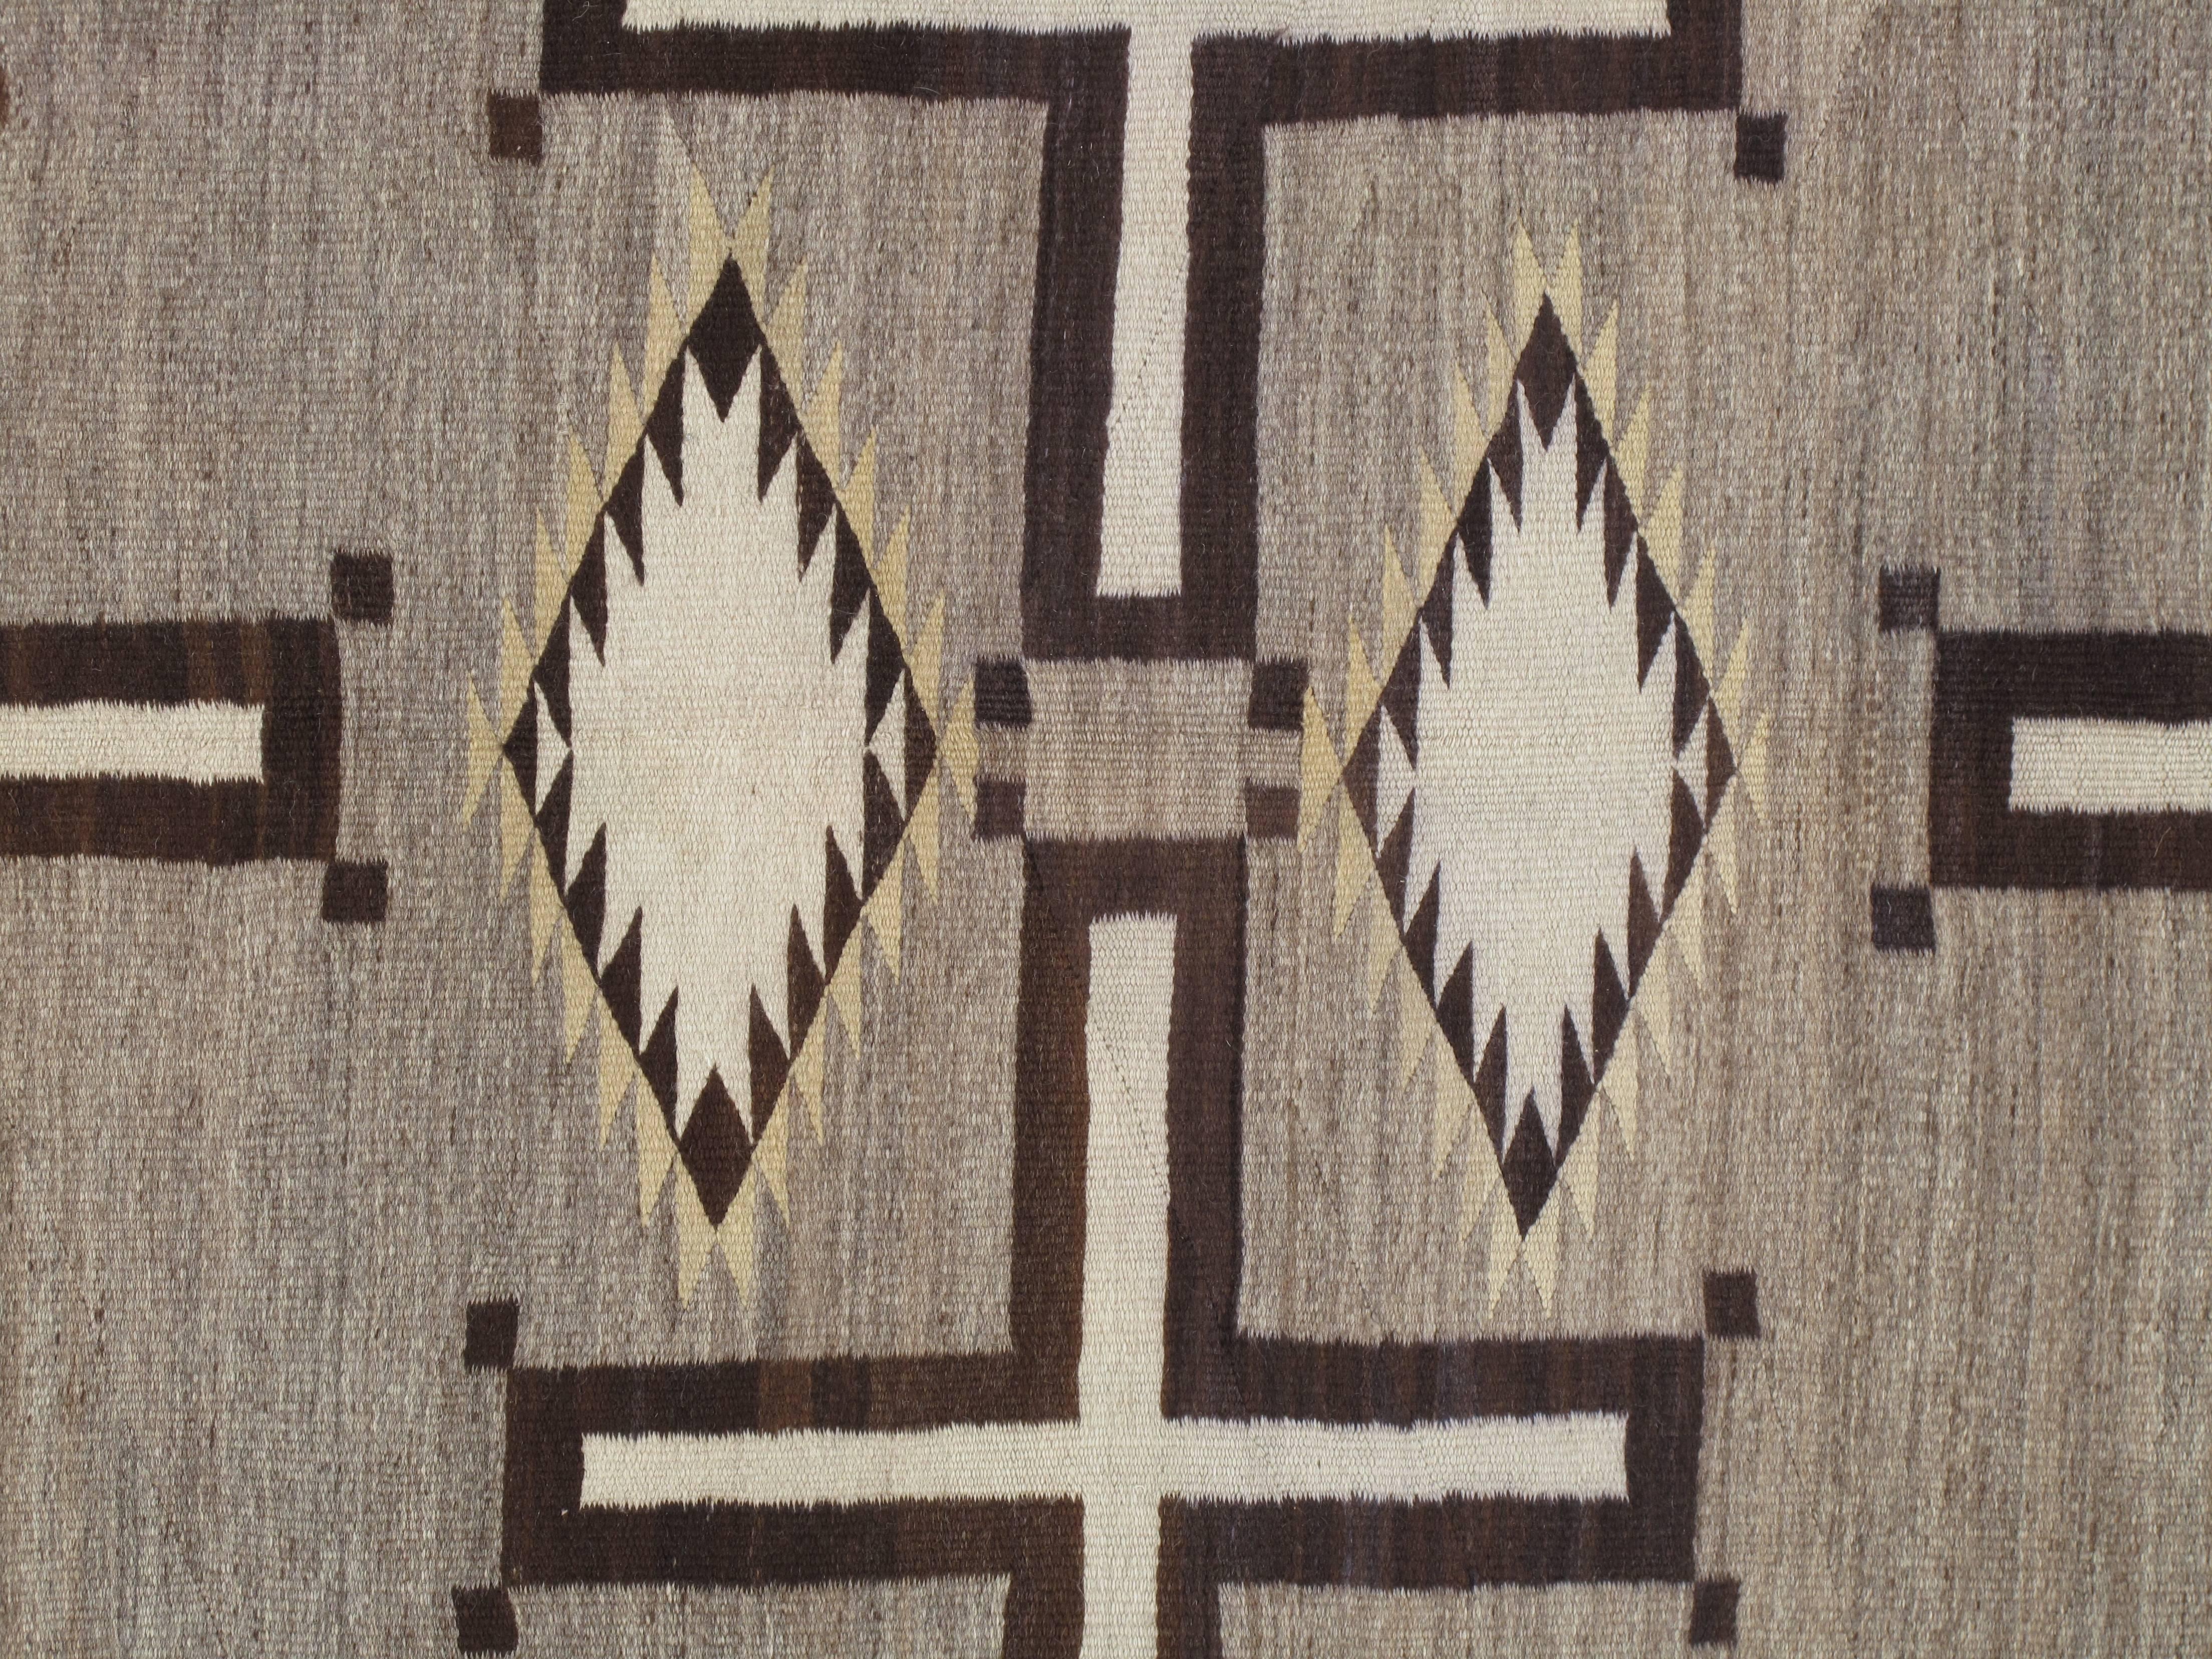 Navajo rugs and blankets are textiles produced by Navajo people of the four corners area of the United States. Navajo textiles are highly regarded and have been sought after as trade items for over 150 years. These rugs and blankets are prized by